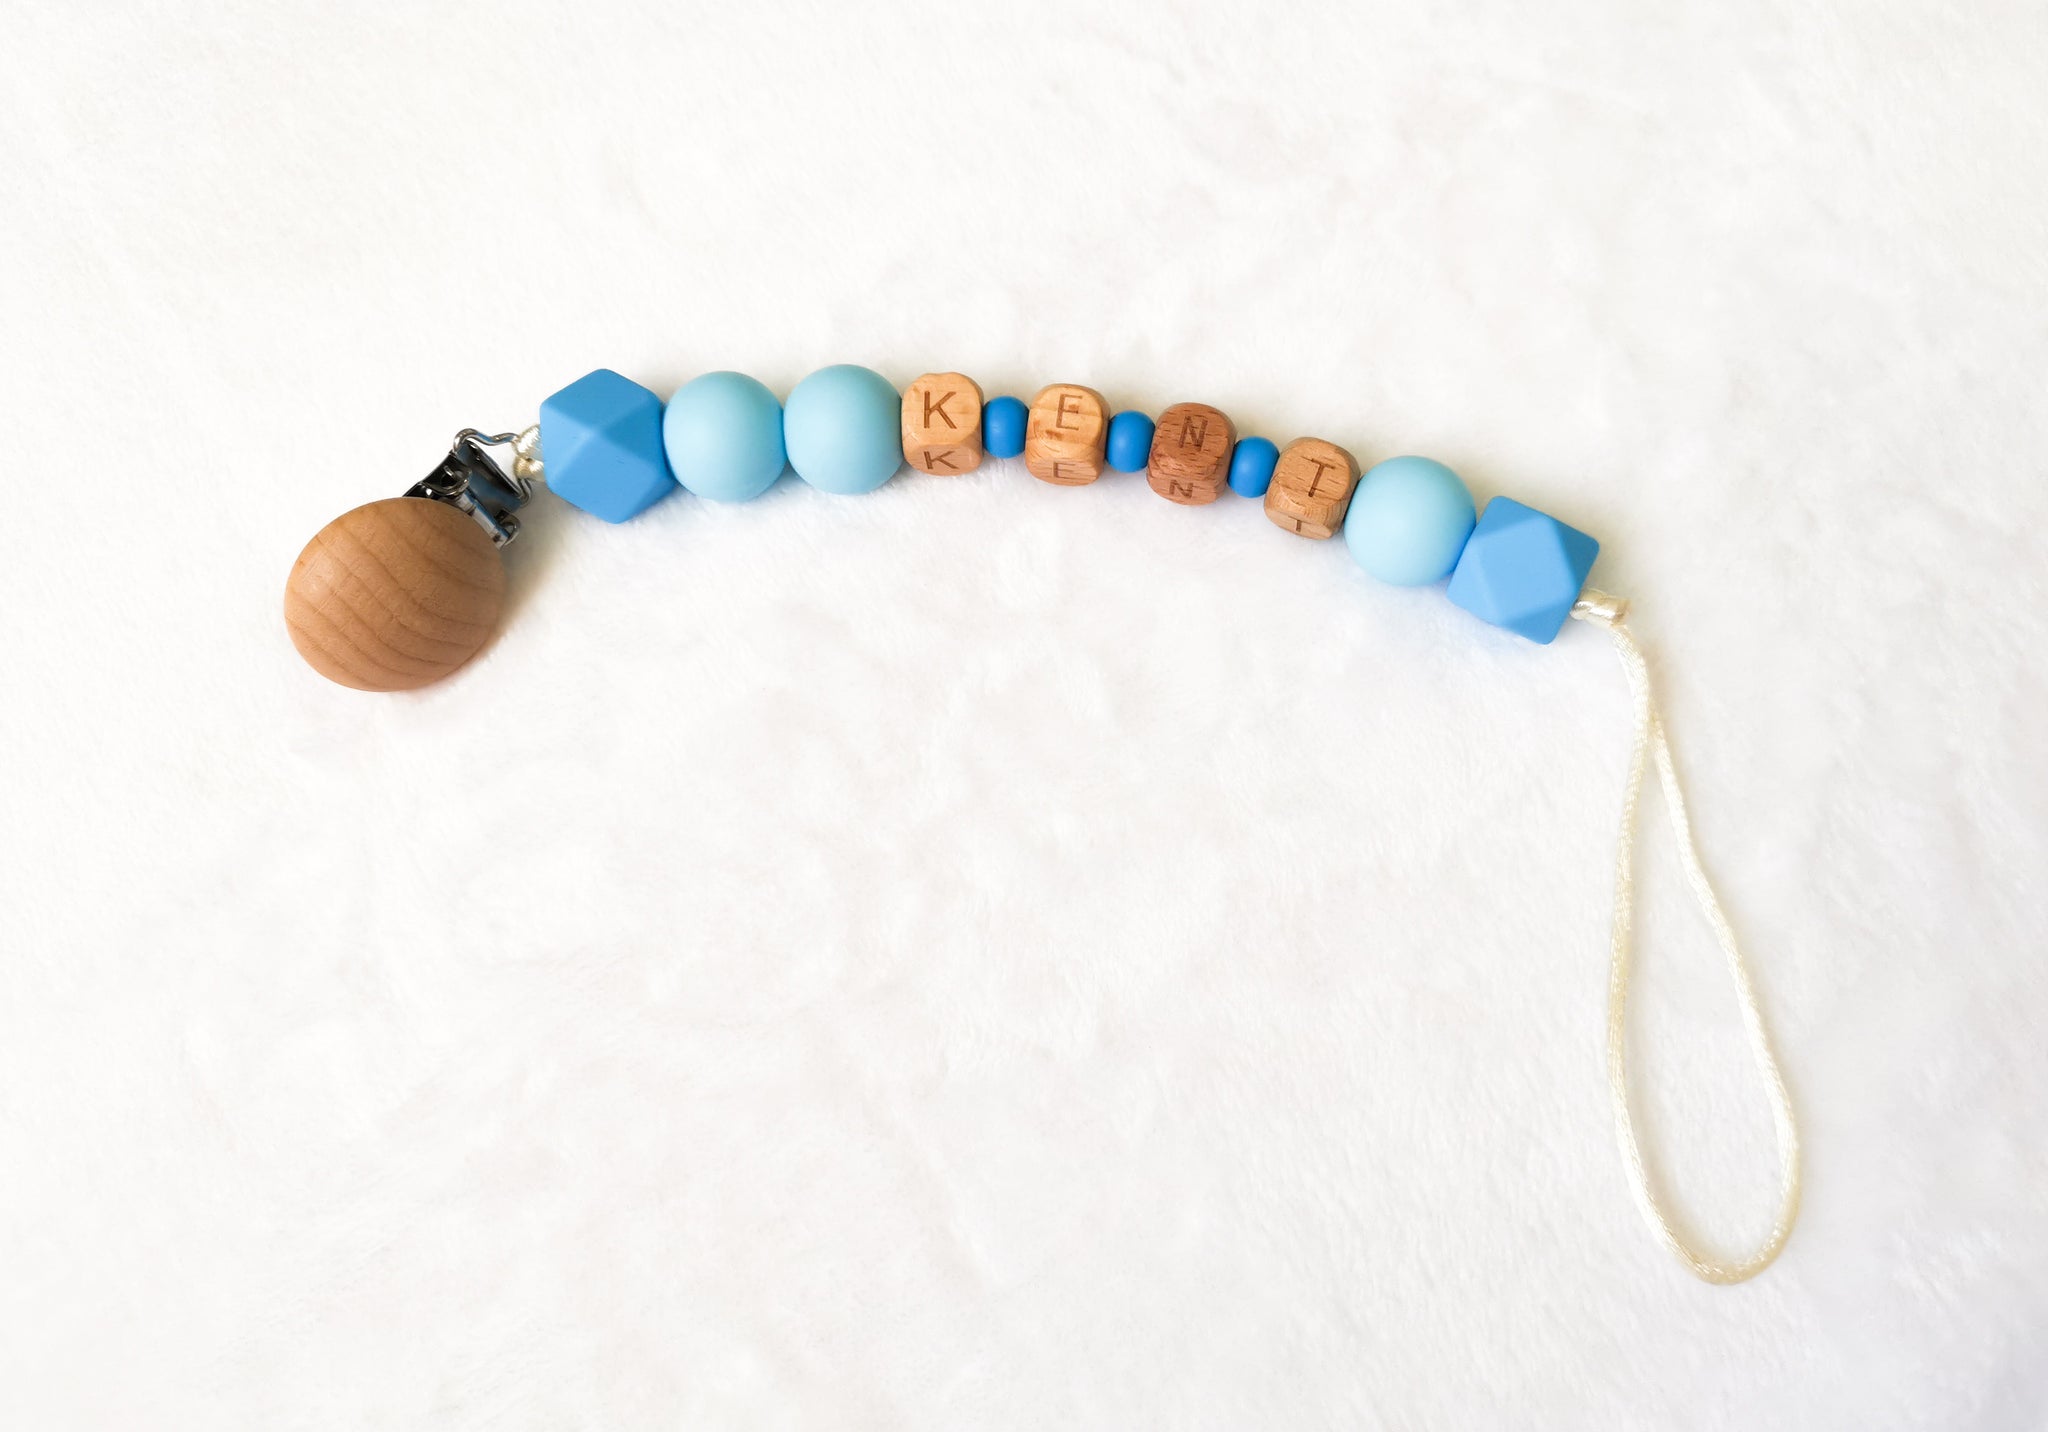 Customized Silicone Teether with Wooden Name | عضاضة سيليكون مع اسم خشبي